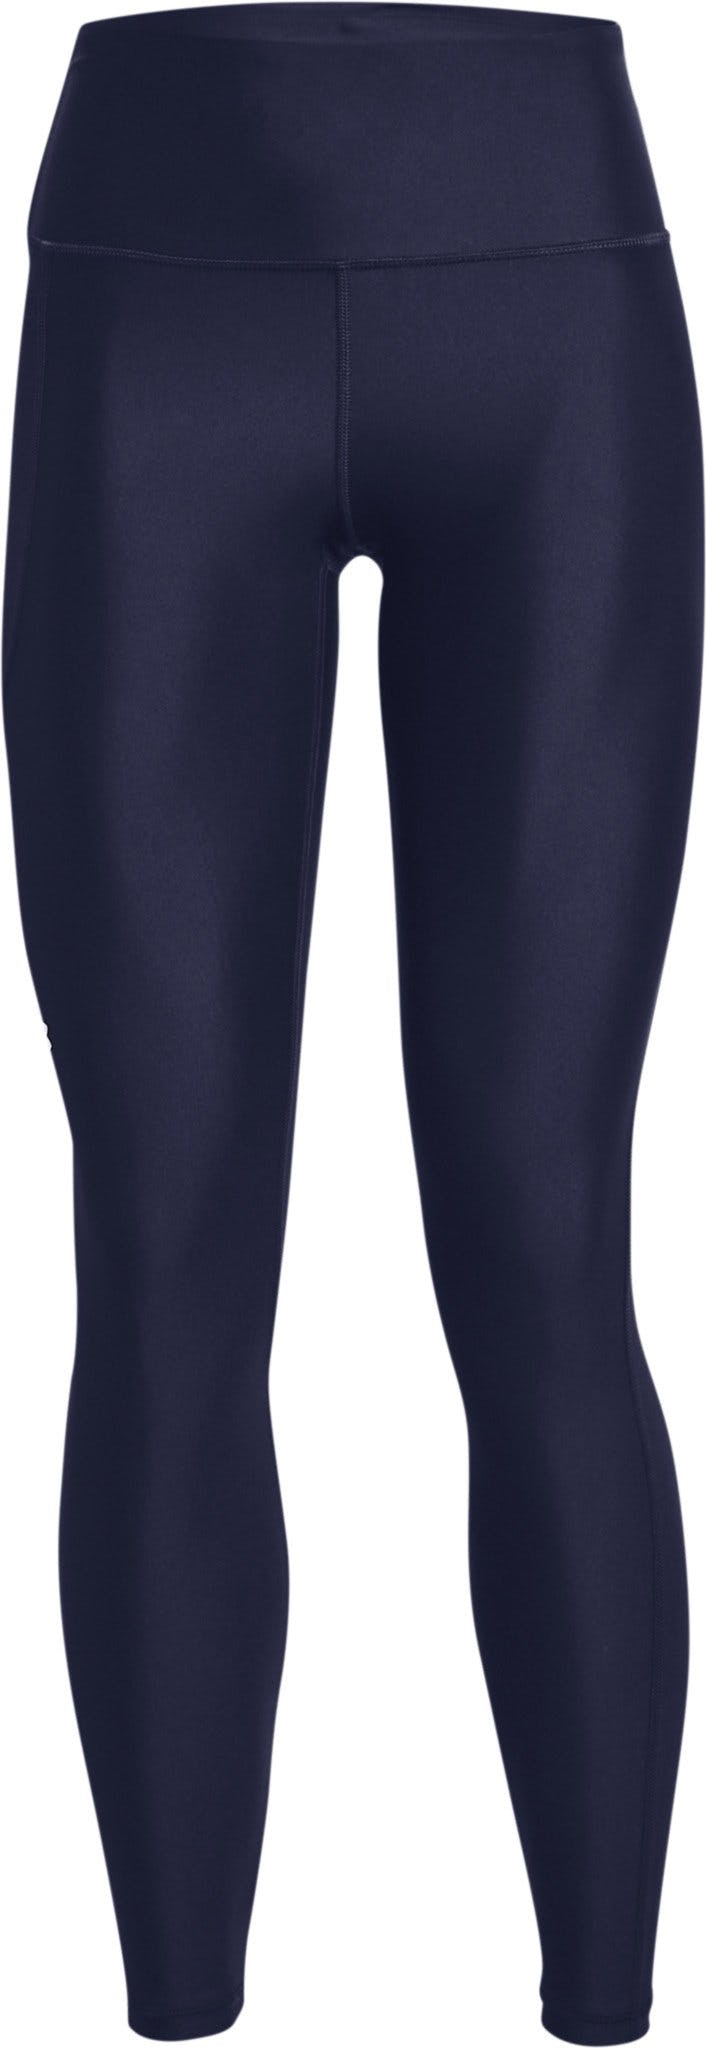 Product image for HeatGear Armour High-Rise Leggings - Women's